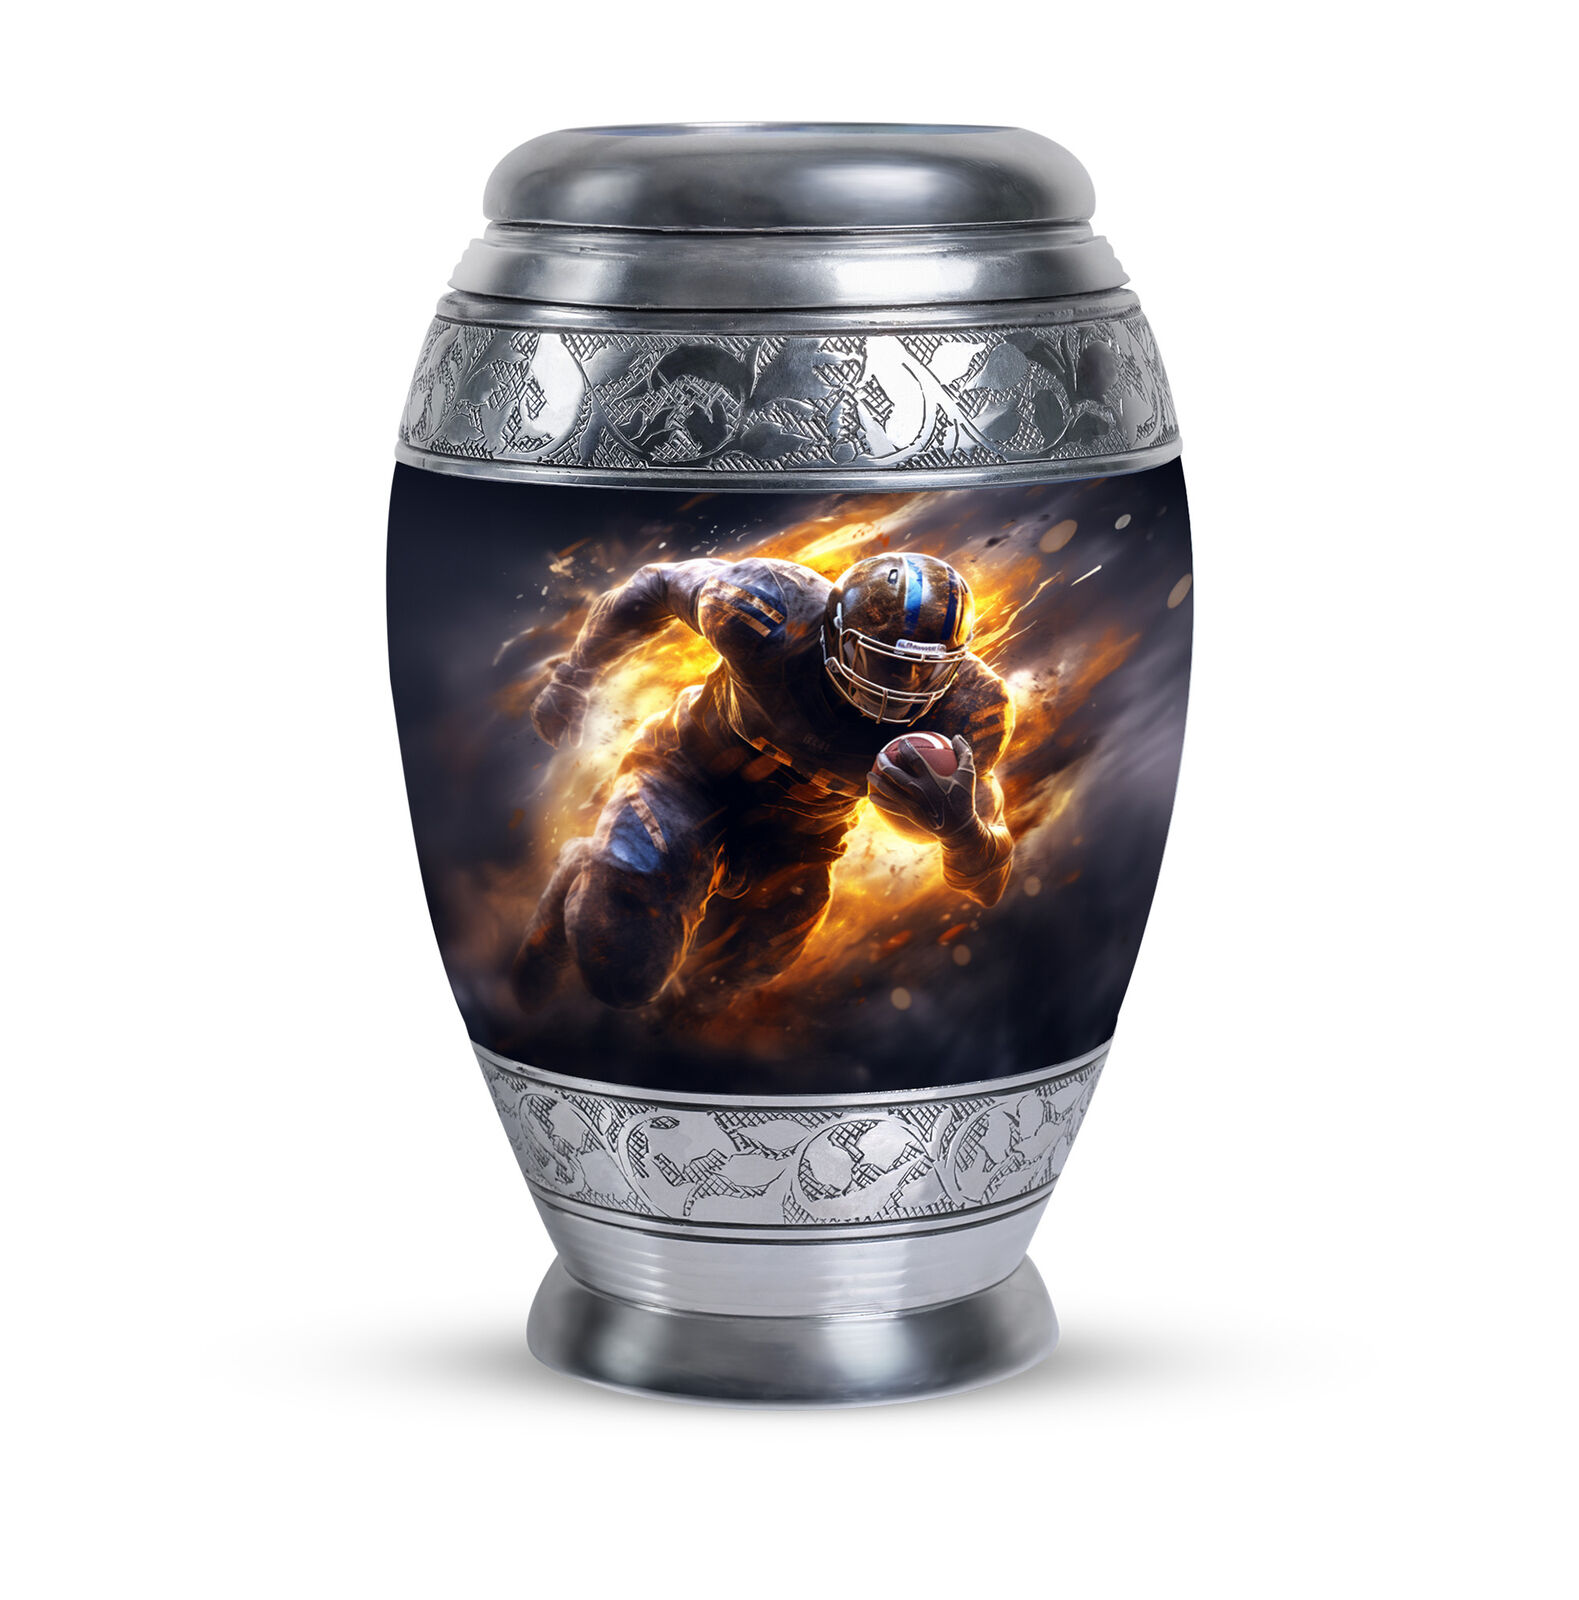 Flaming Football Player Charging Ahead Cremation Urns For Adult Ashes Women